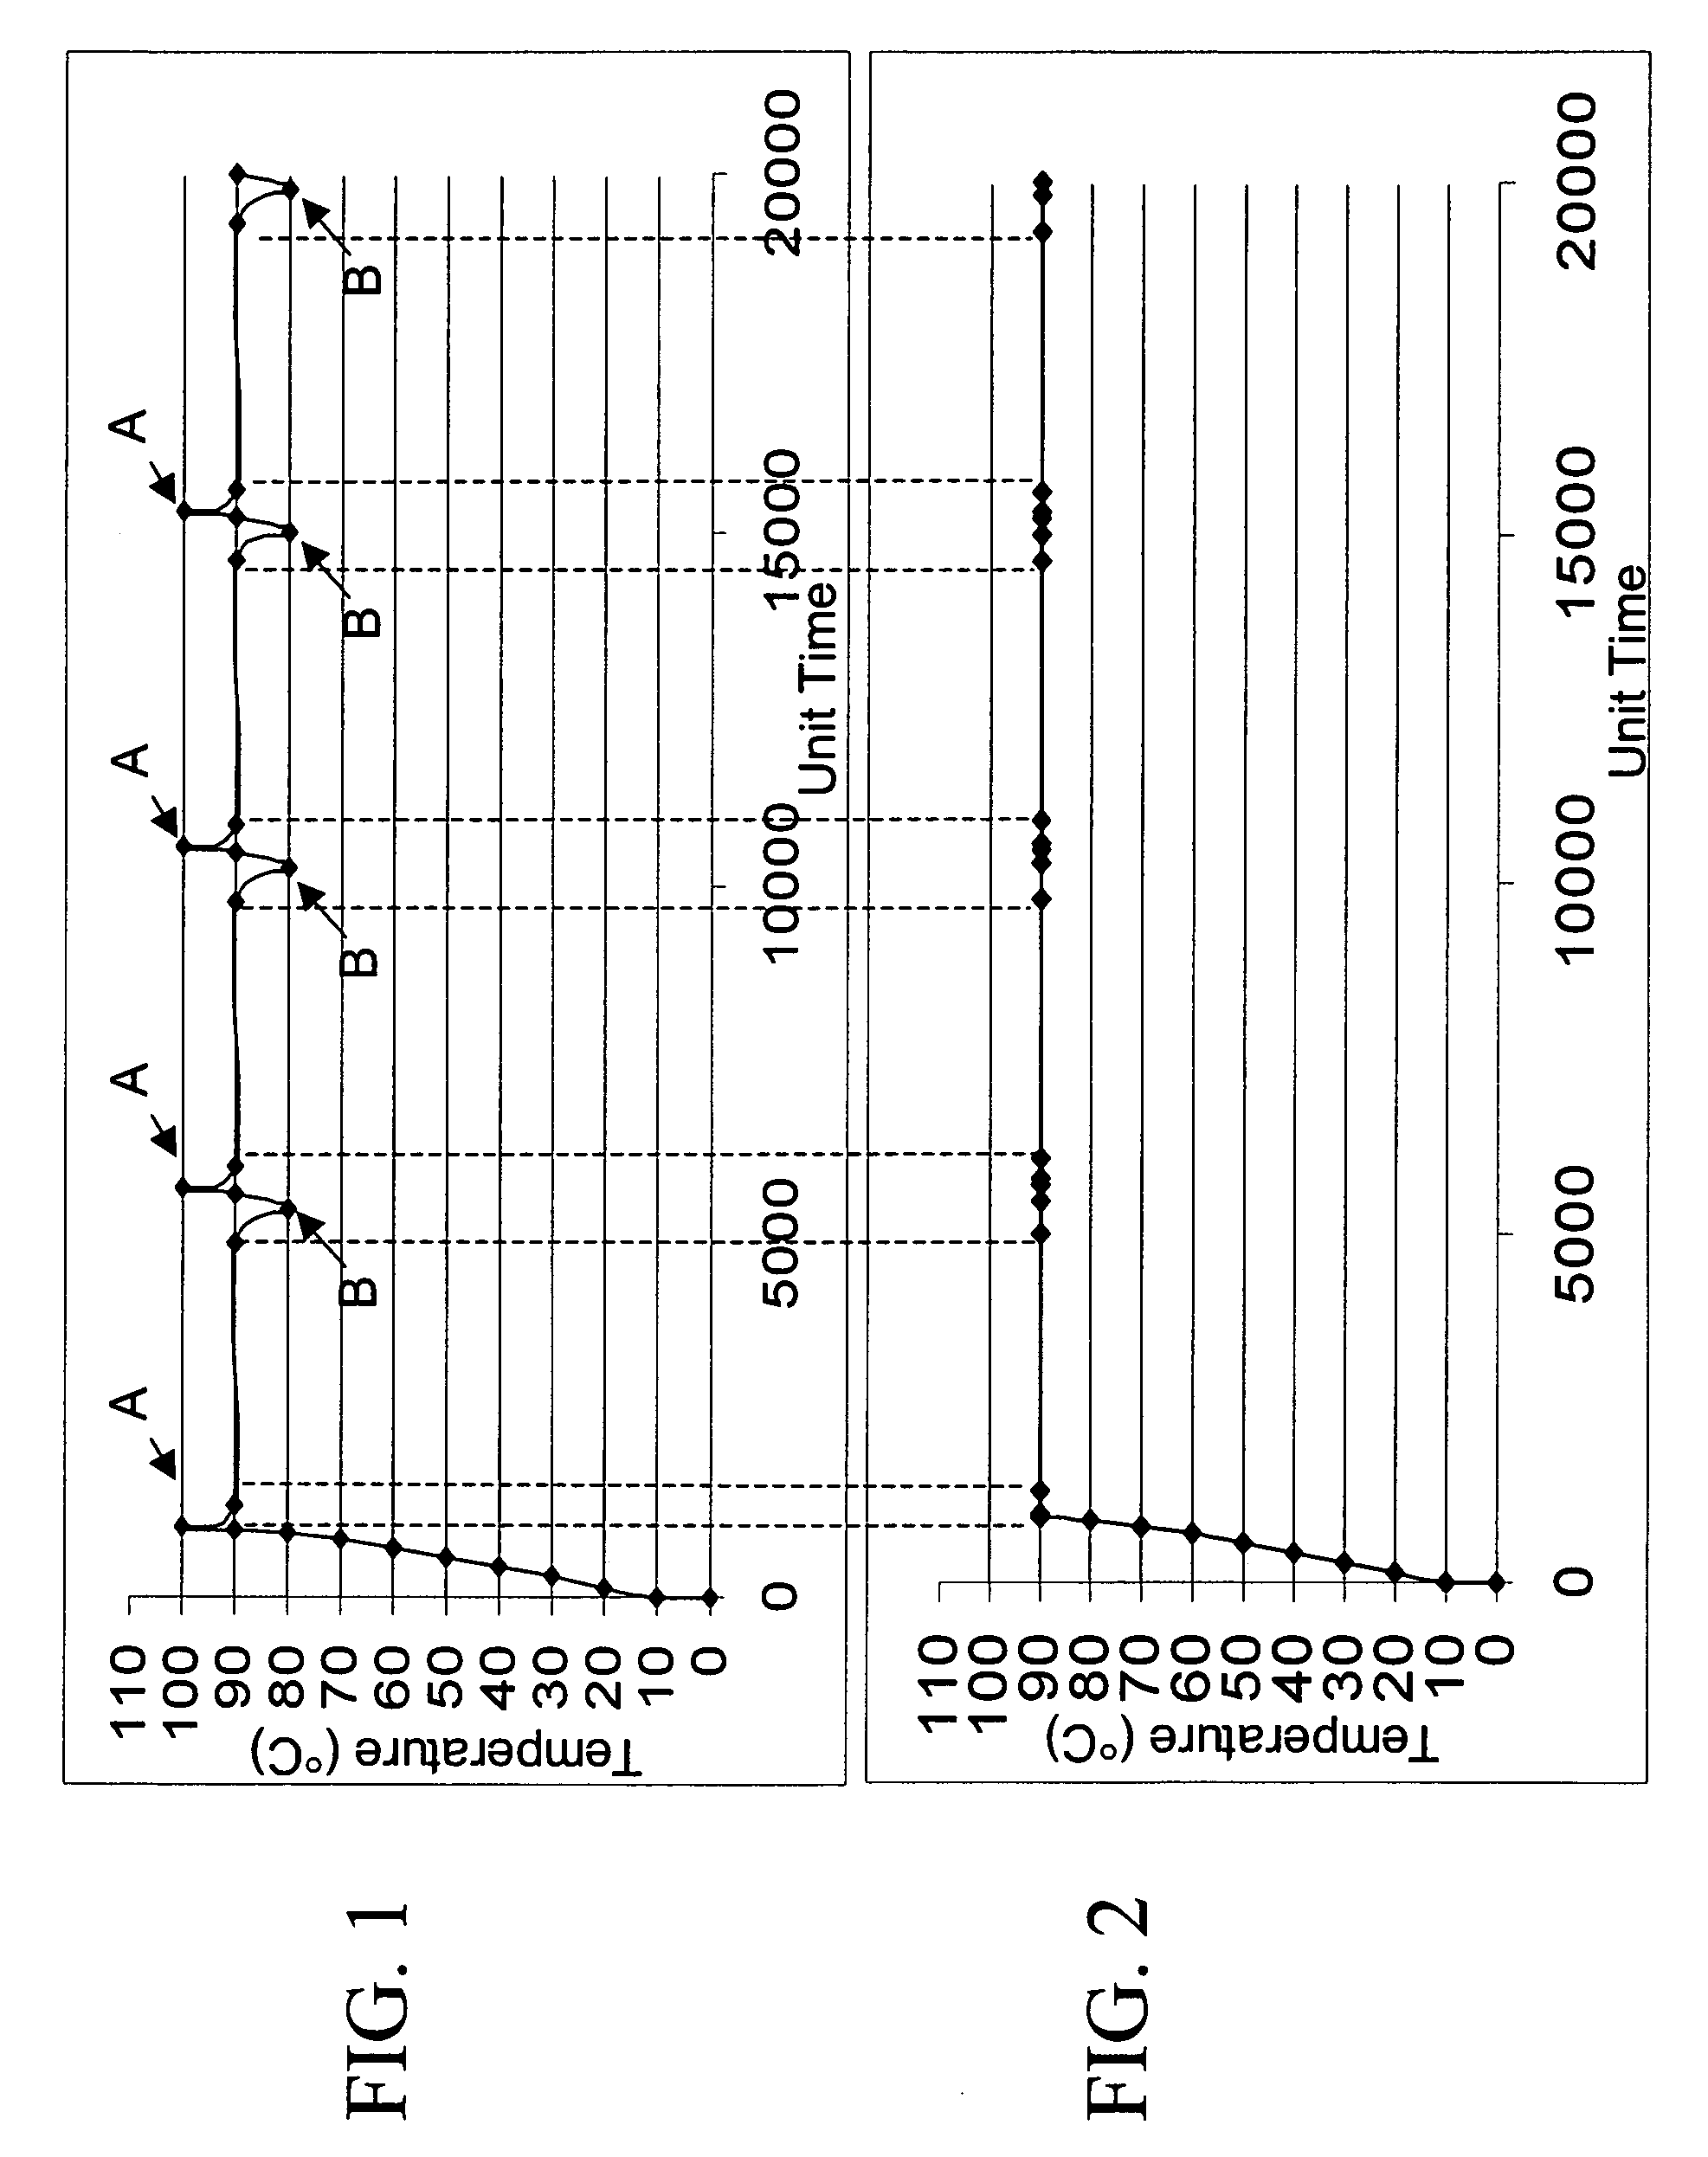 Integrated circuit (IC) test assembly including phase change material for stabilizing temperature during stress testing of integrated circuits and method thereof